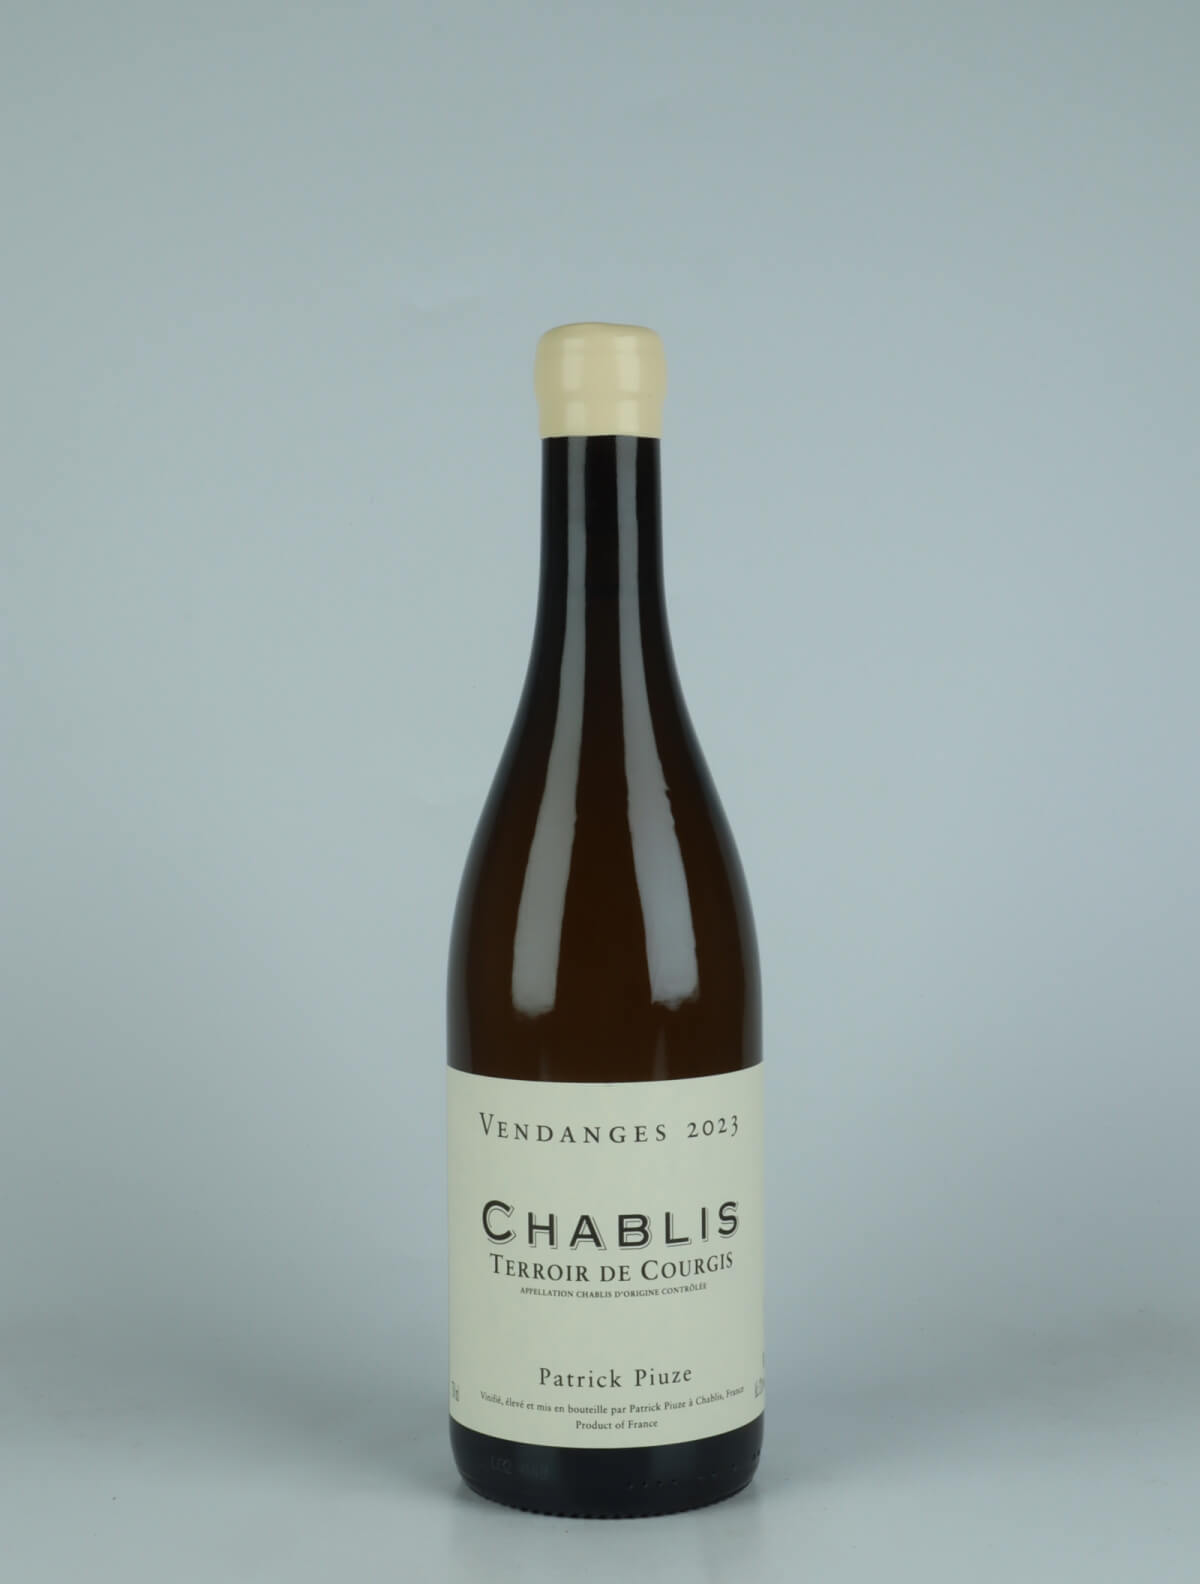 A bottle 2023 Chablis - Terroir de Courgis White wine from Patrick Piuze, Burgundy in France